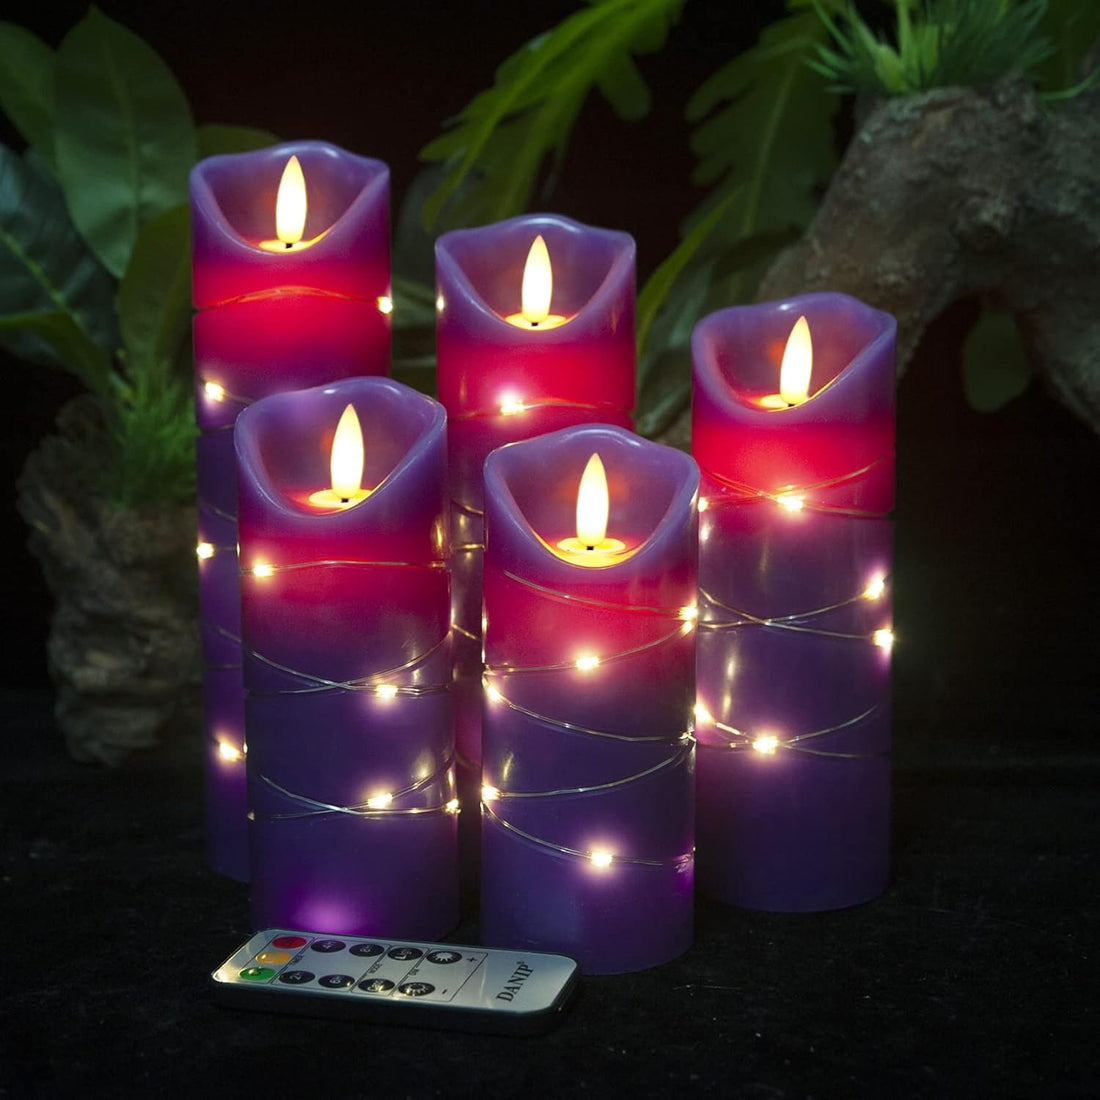 DANIP Purple Flameless Candle, Built-in Star String, 5 LED Candles, 11 Button Remote Control, 24 Hours Timer (Purple)